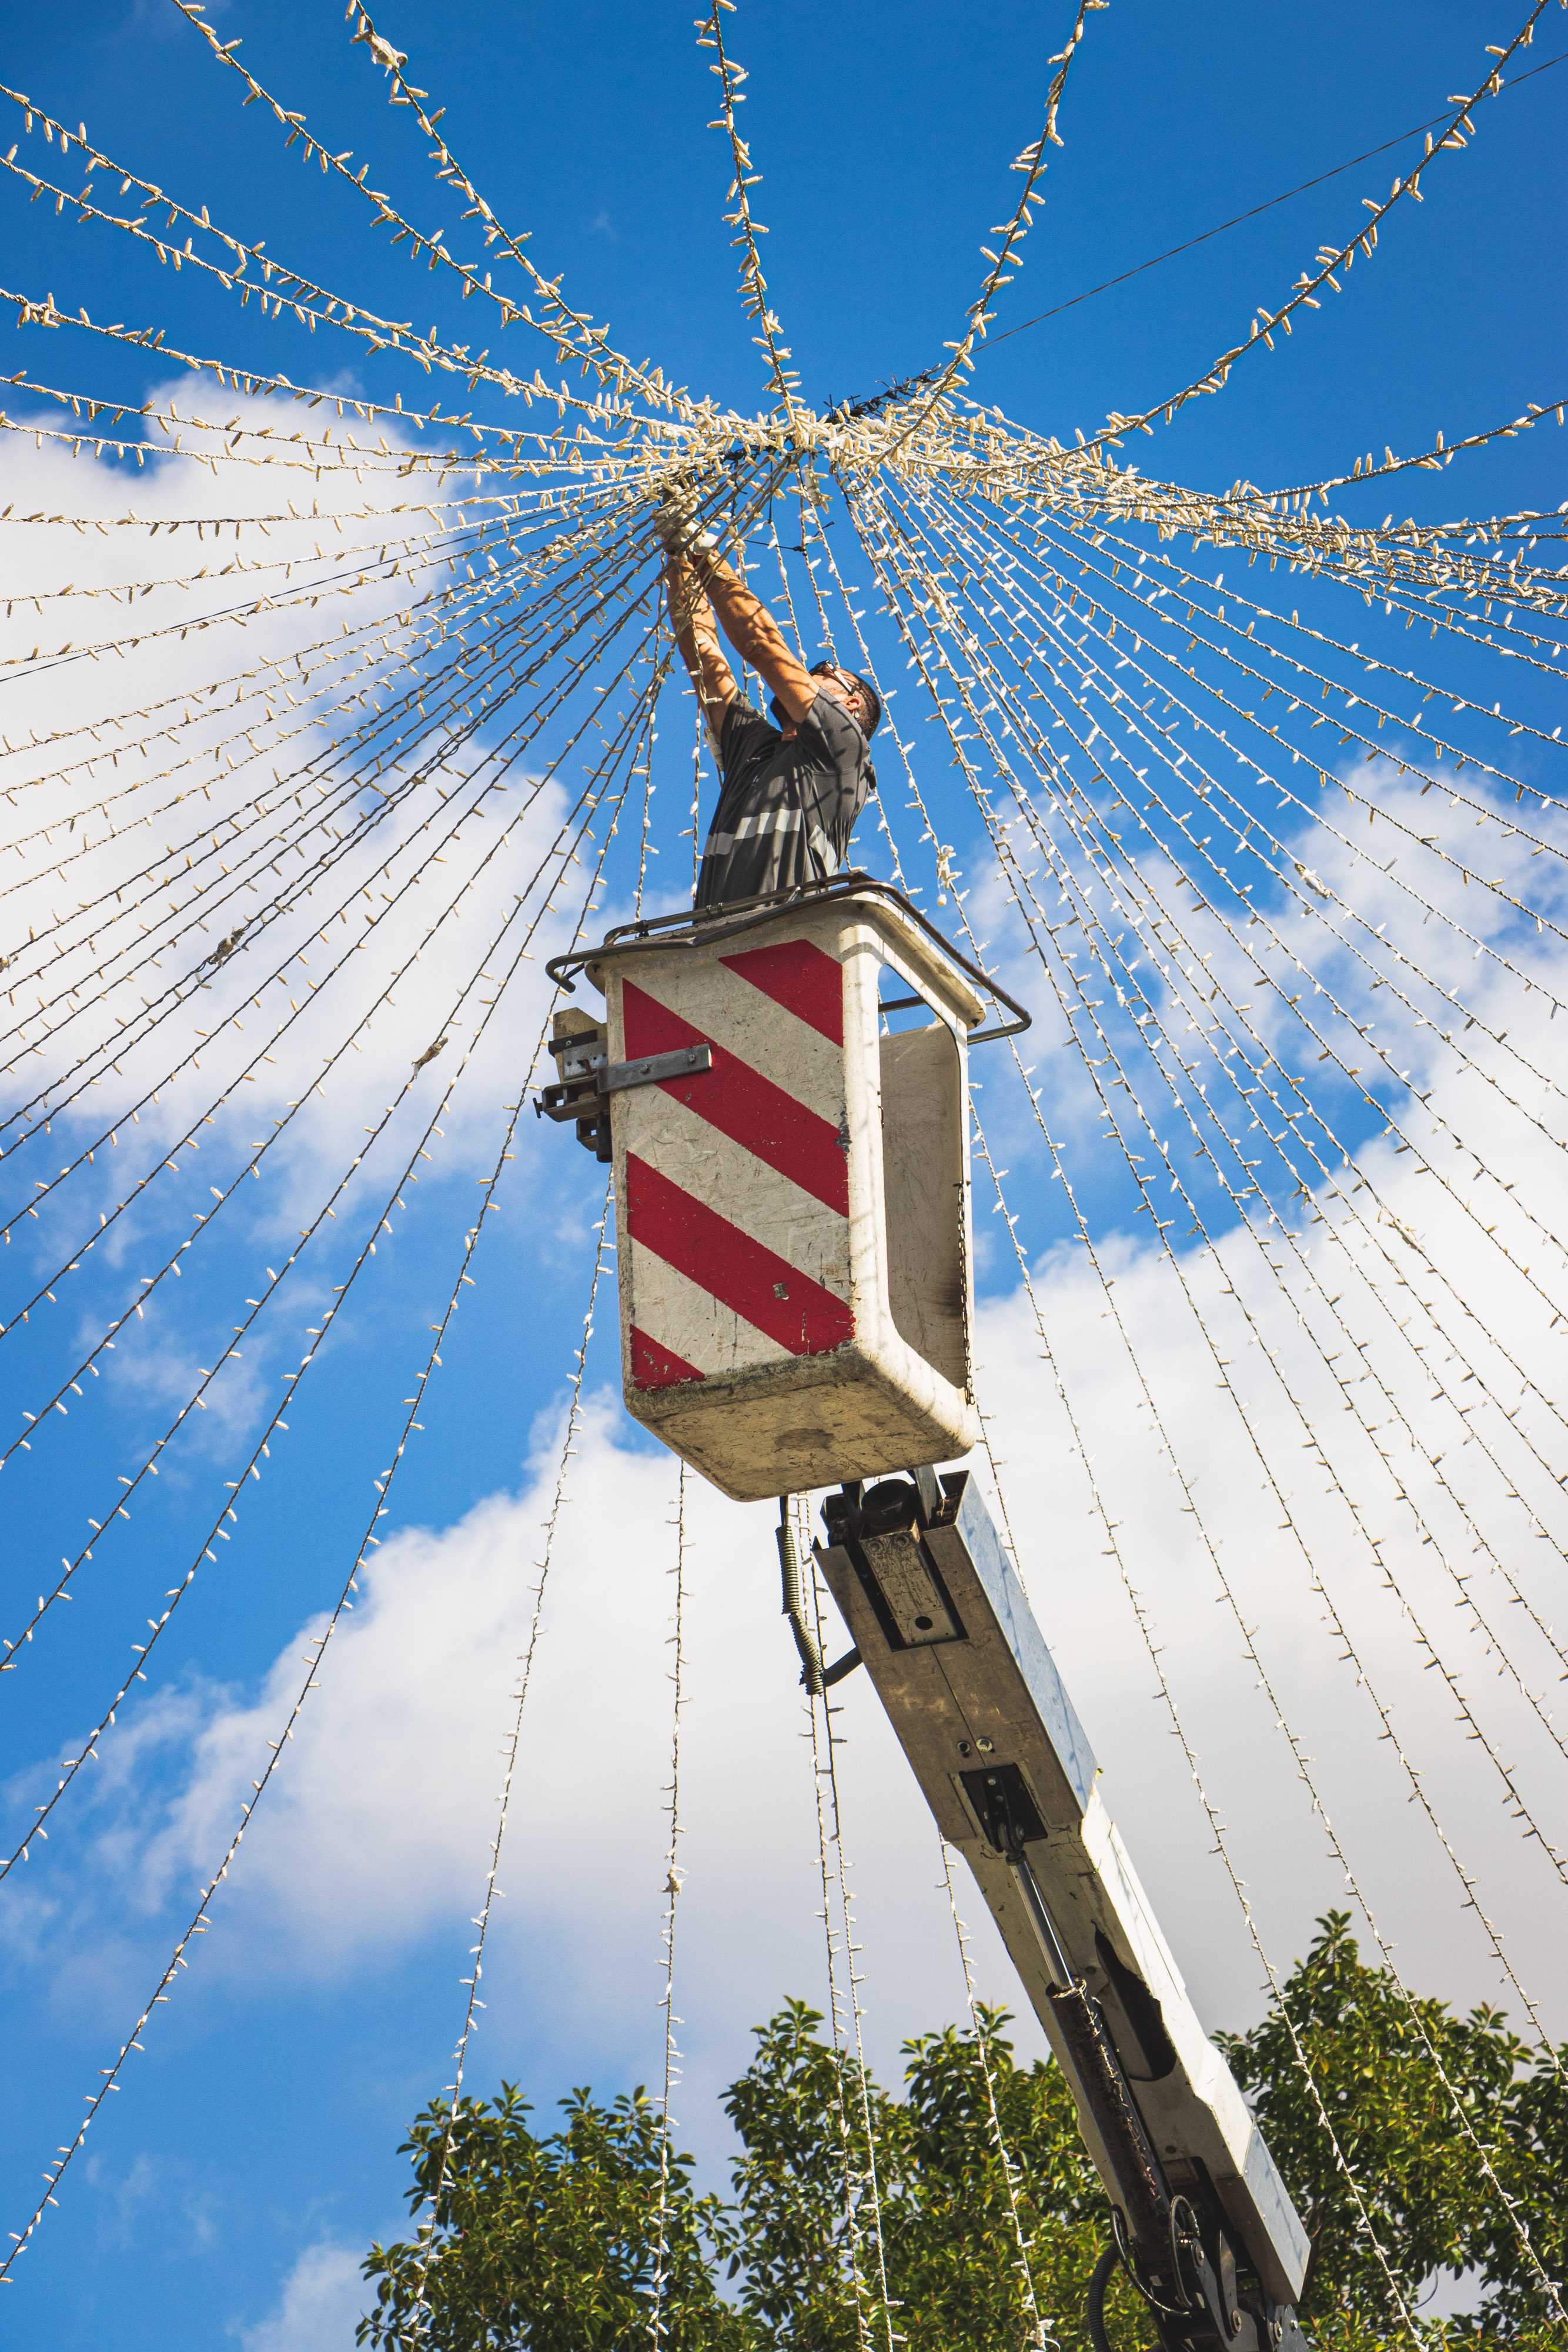 A man in a bucket lift hangs lights as they cascade down around him in a cone shape of different strings of tiny lights